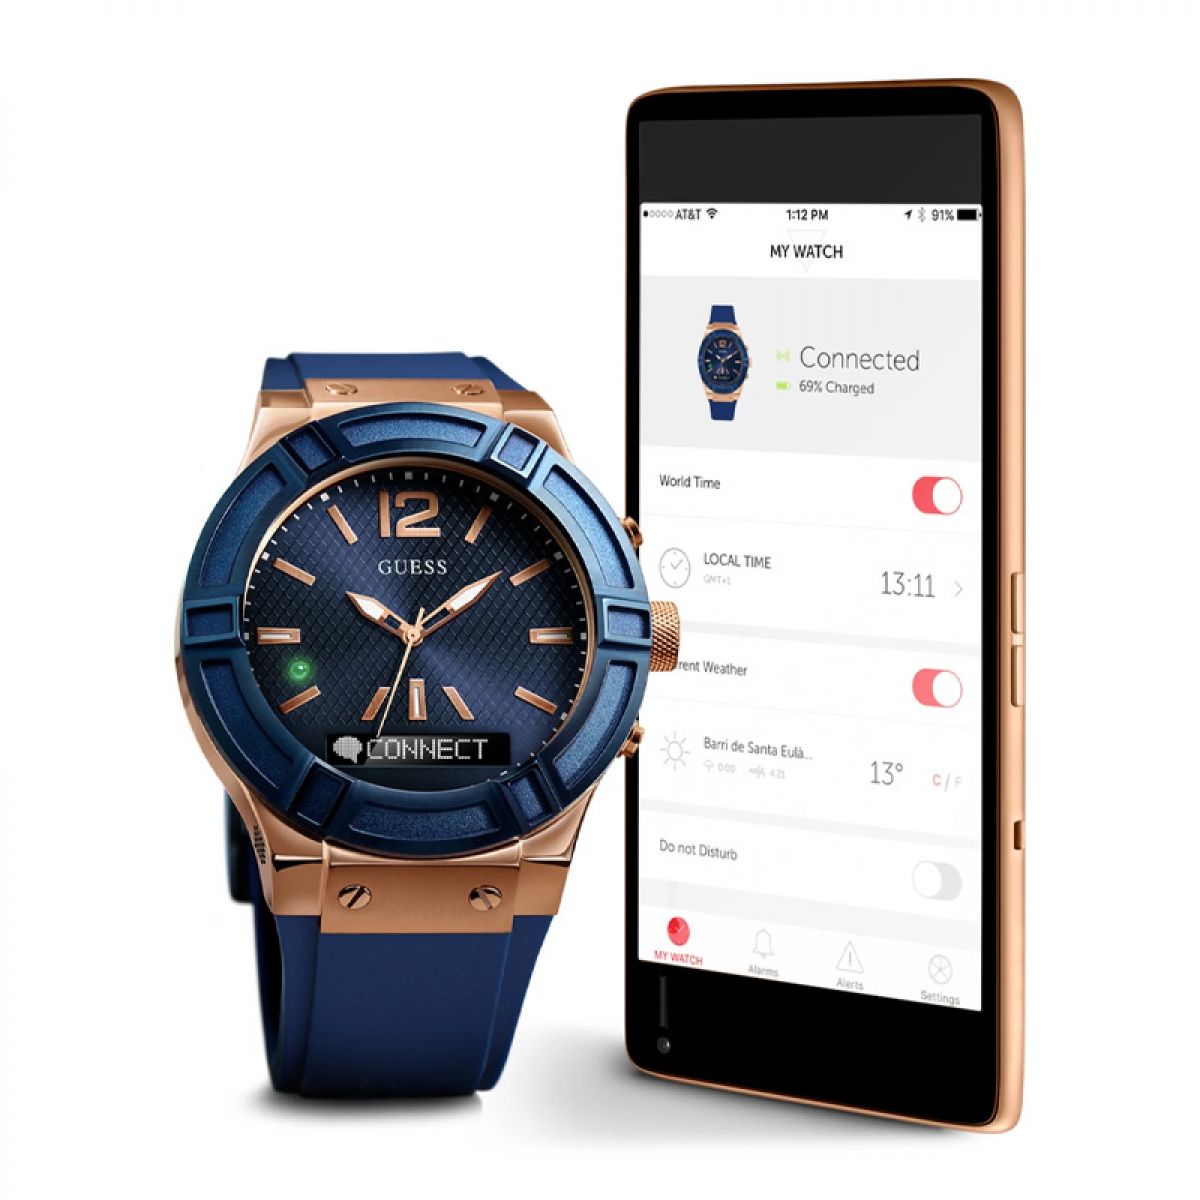 Guess Connect Smartwatches | C0001G1